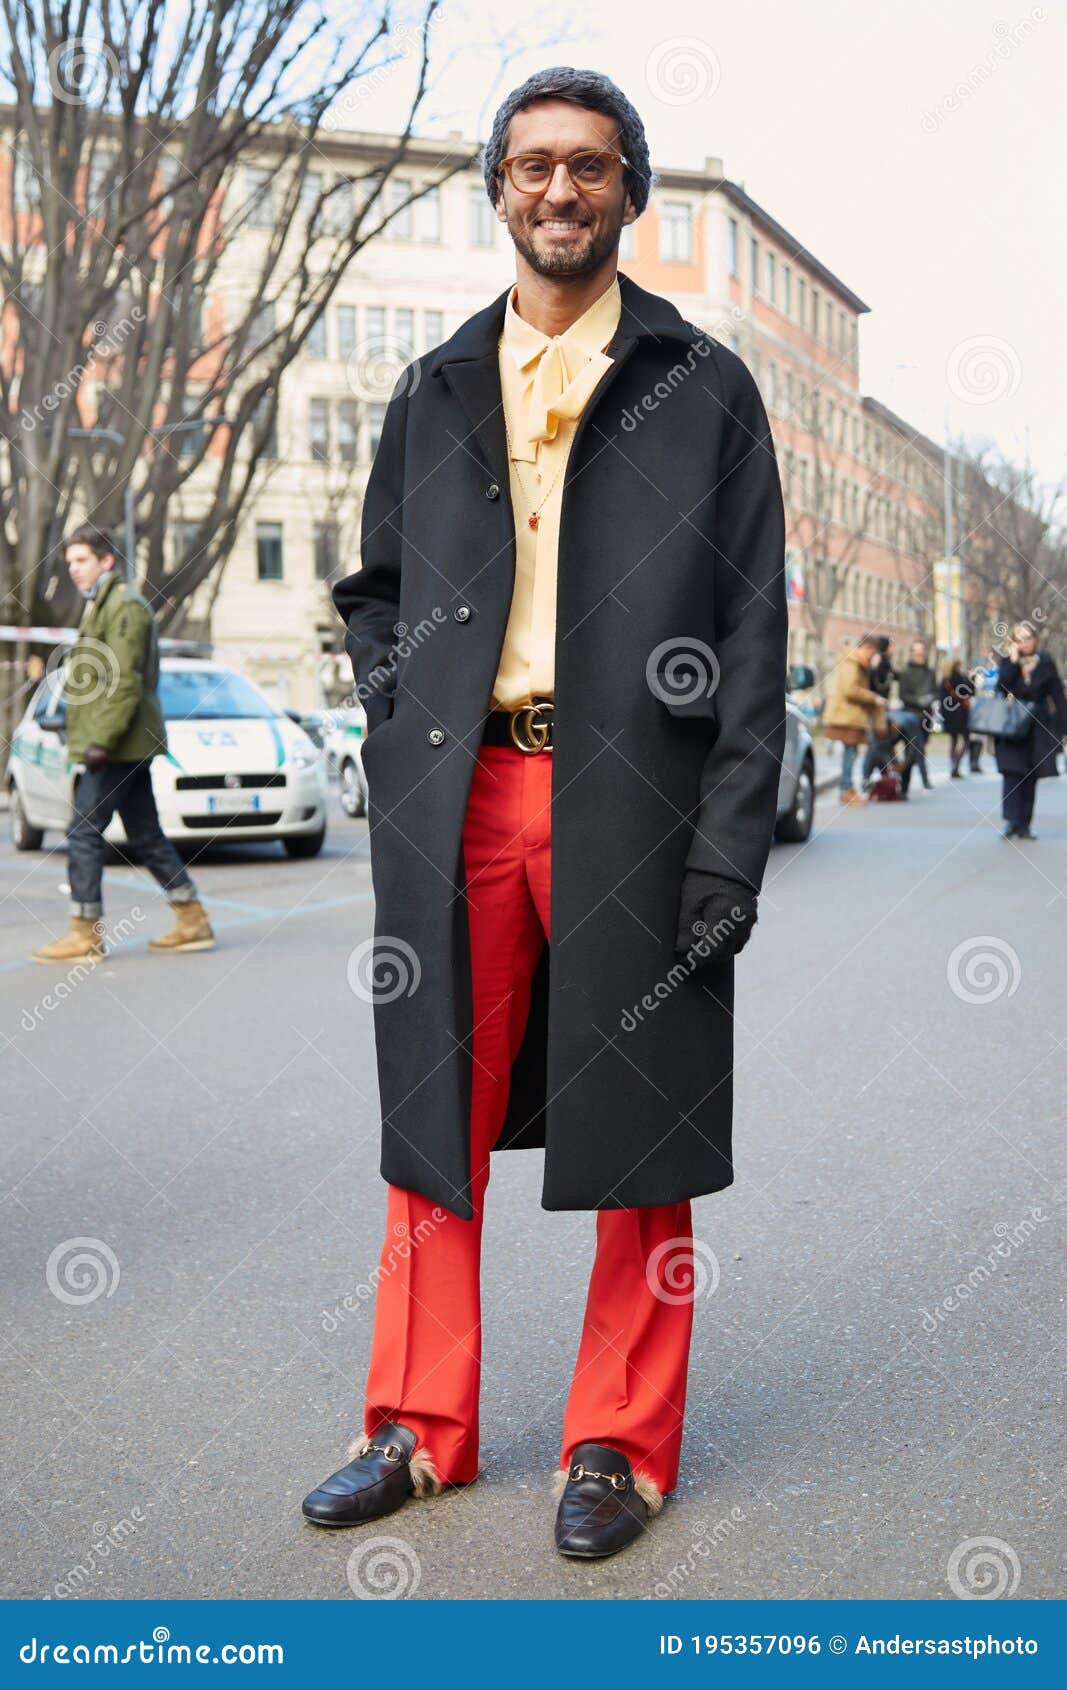 Stylish Man with Red Trousers and Gucci Belt Poses for Photographers before  Giorgio Armani Fashion Show on Editorial Photo - Image of giorgio, poses:  195357096